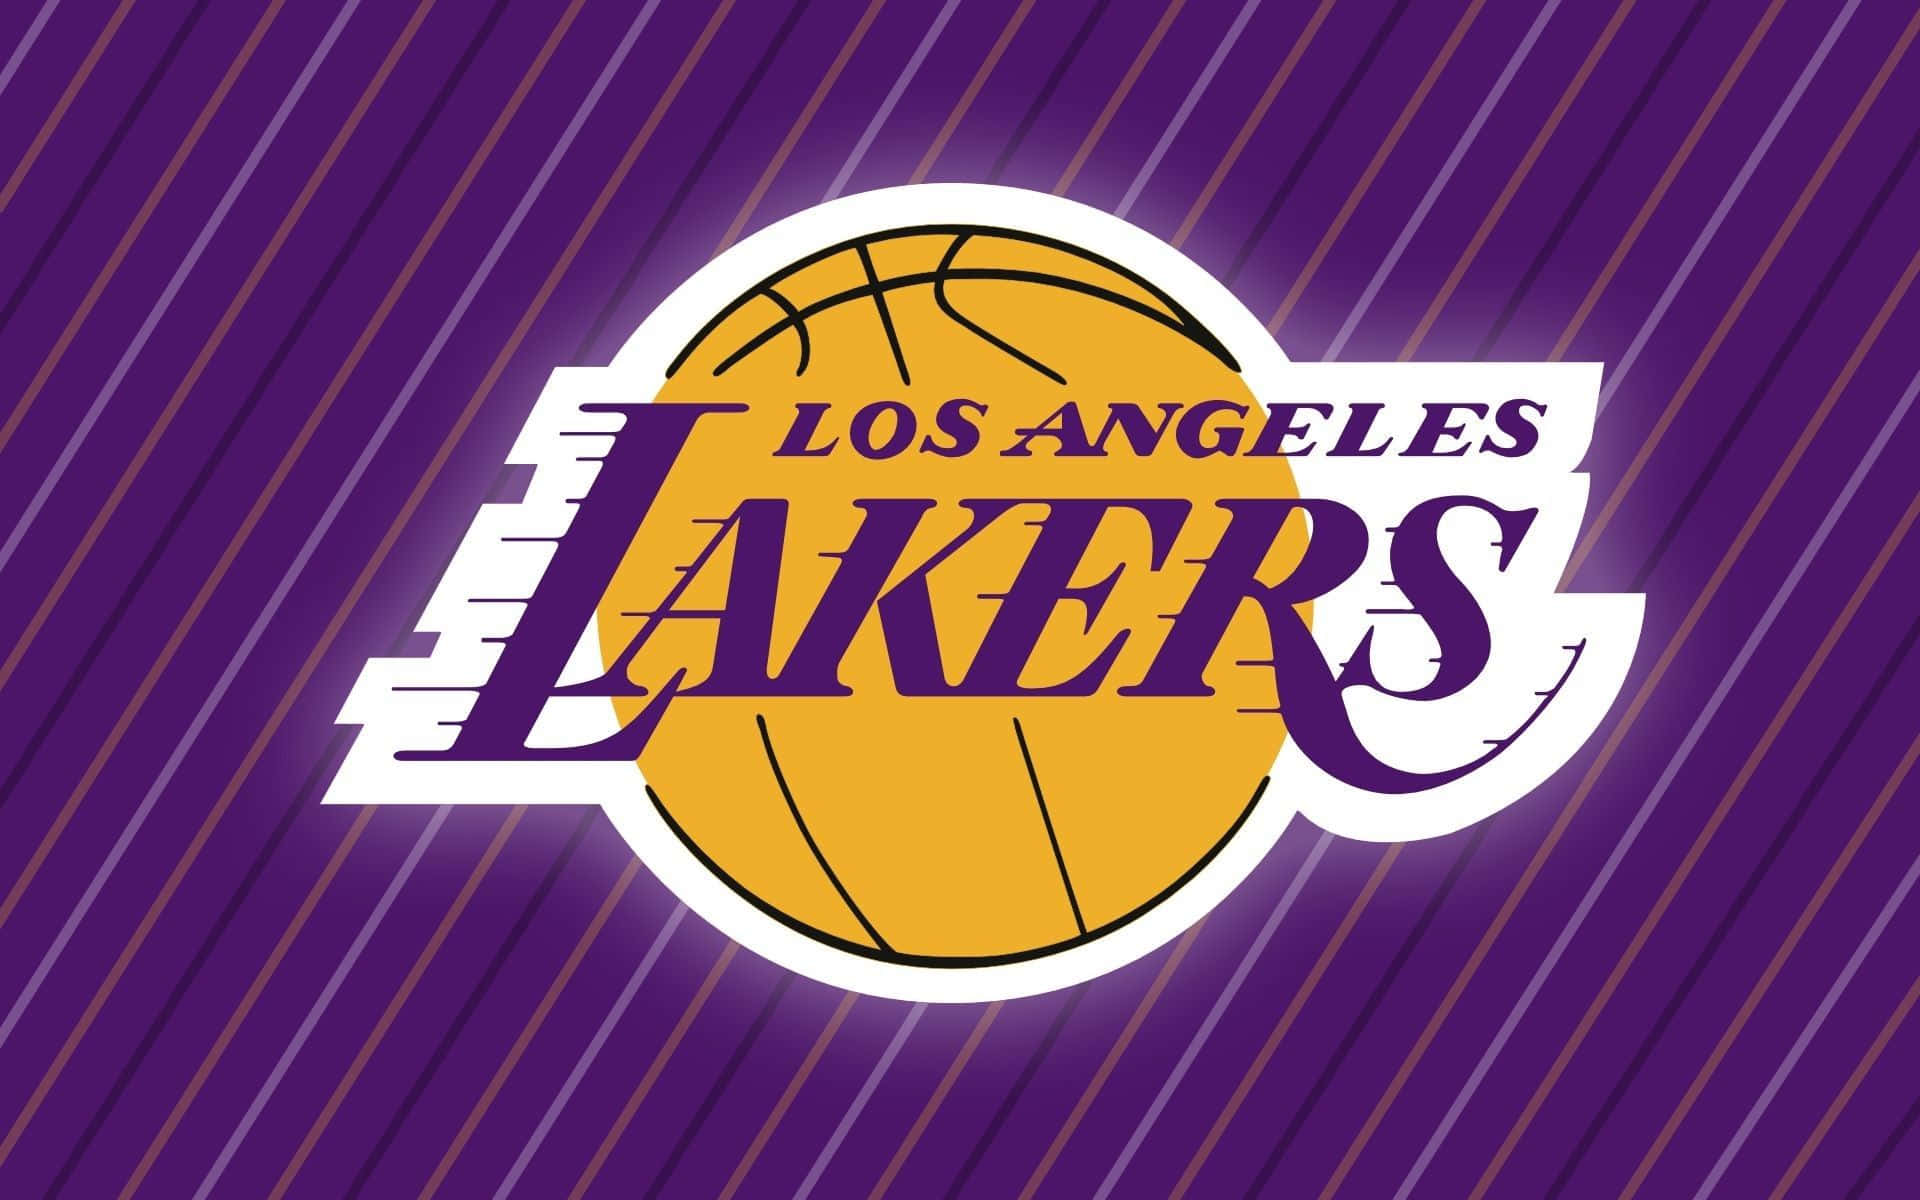 Finish The Job - LA Lakers Claiming Another Championship